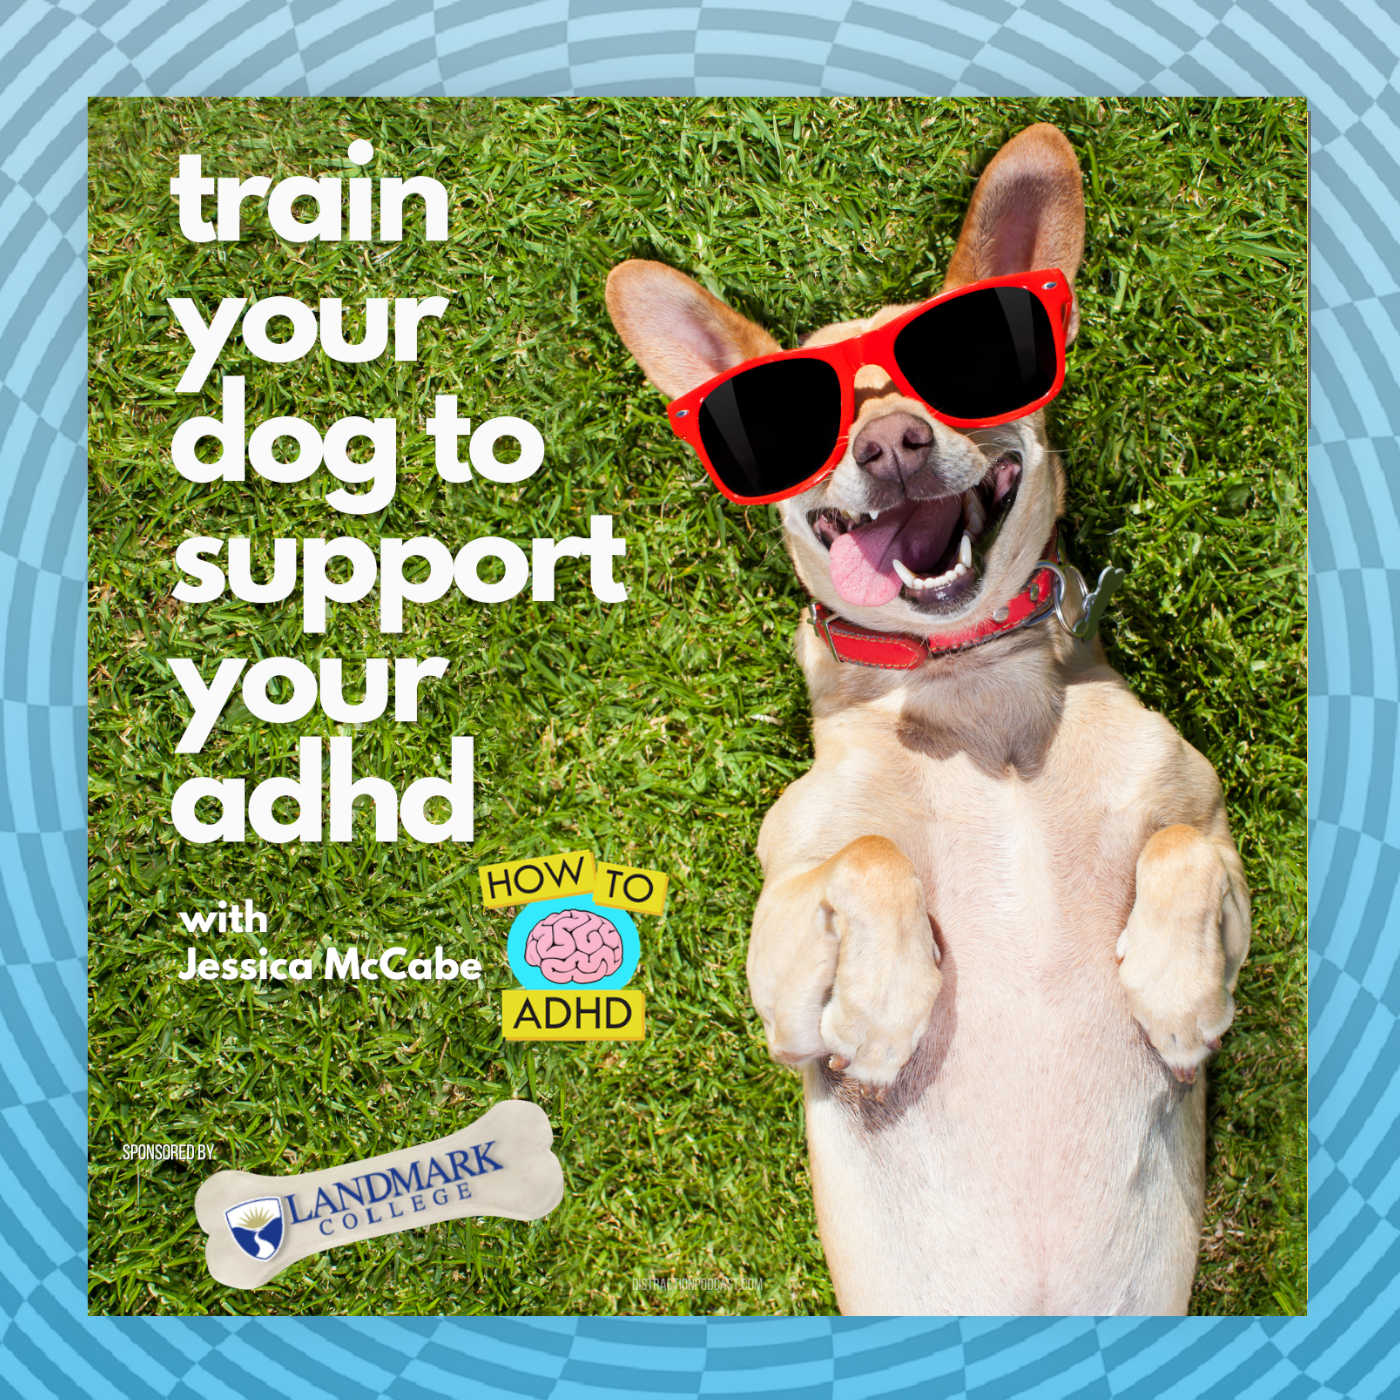 Train Your Dog to Support Your ADHD with Jessica McCabe and Landmark ...